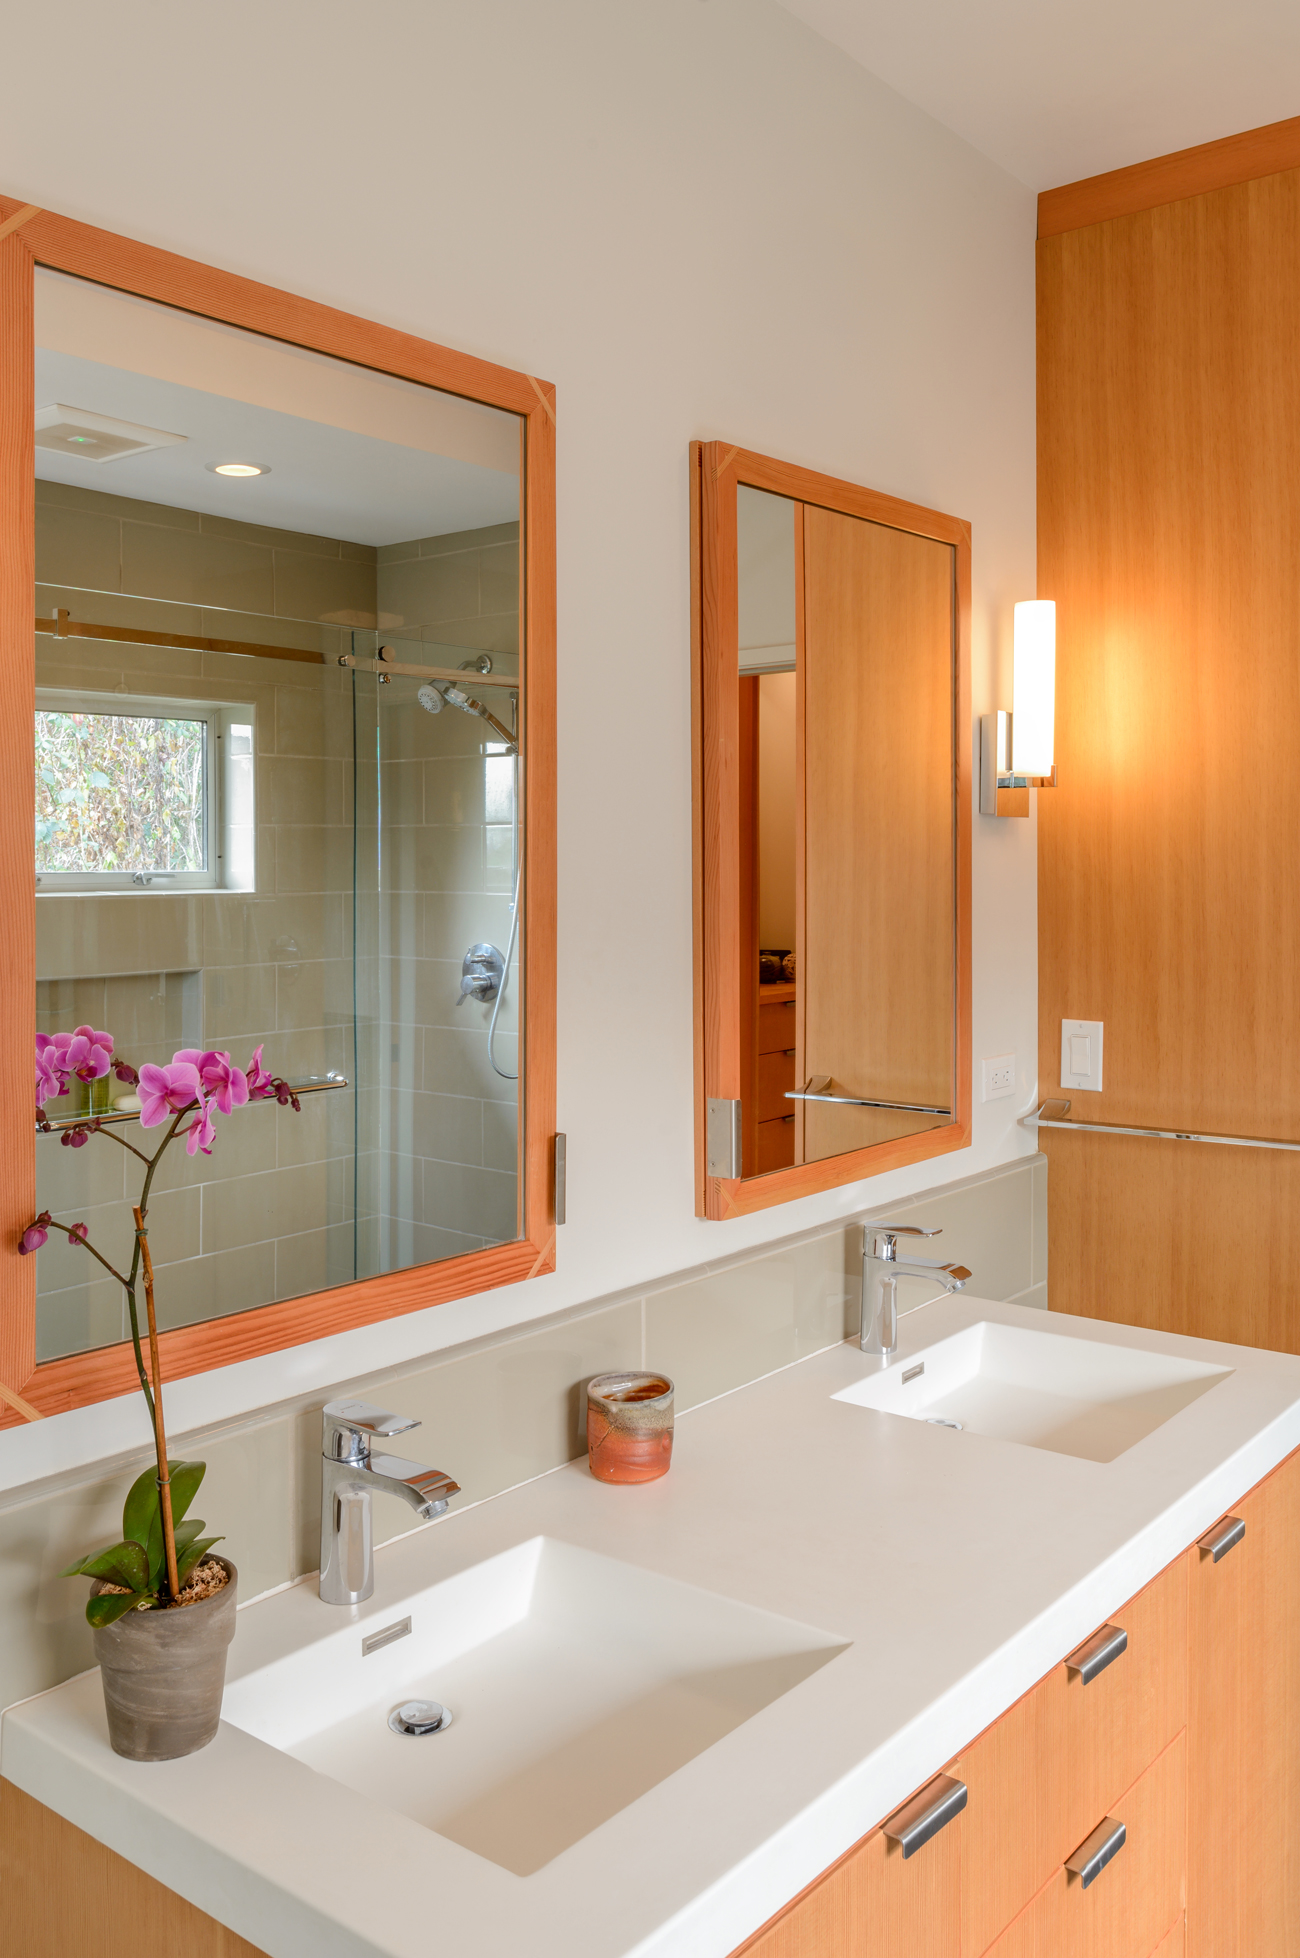 Seattle Home Remodel Features New Sinks